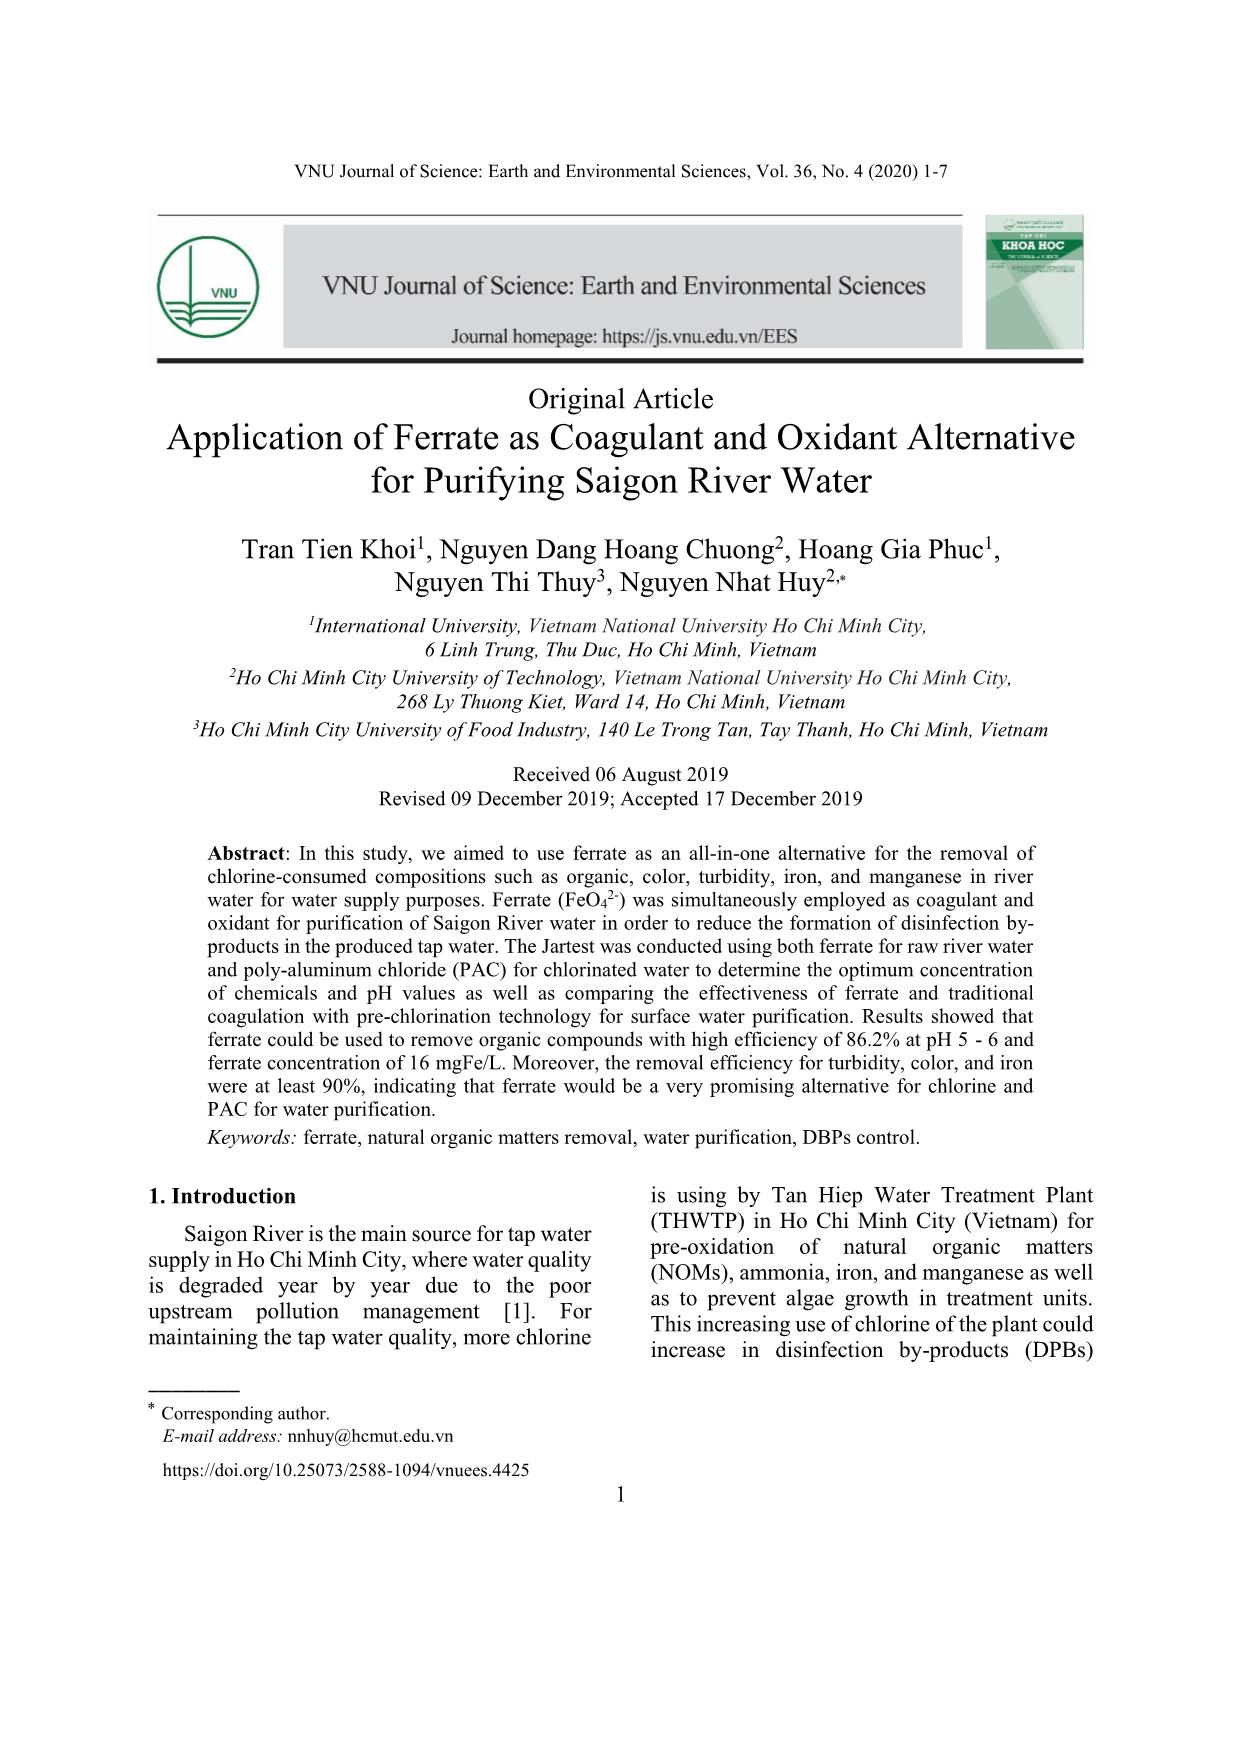 Application of Ferrate as Coagulant and Oxidant Alternative for Purifying Saigon River Water trang 1